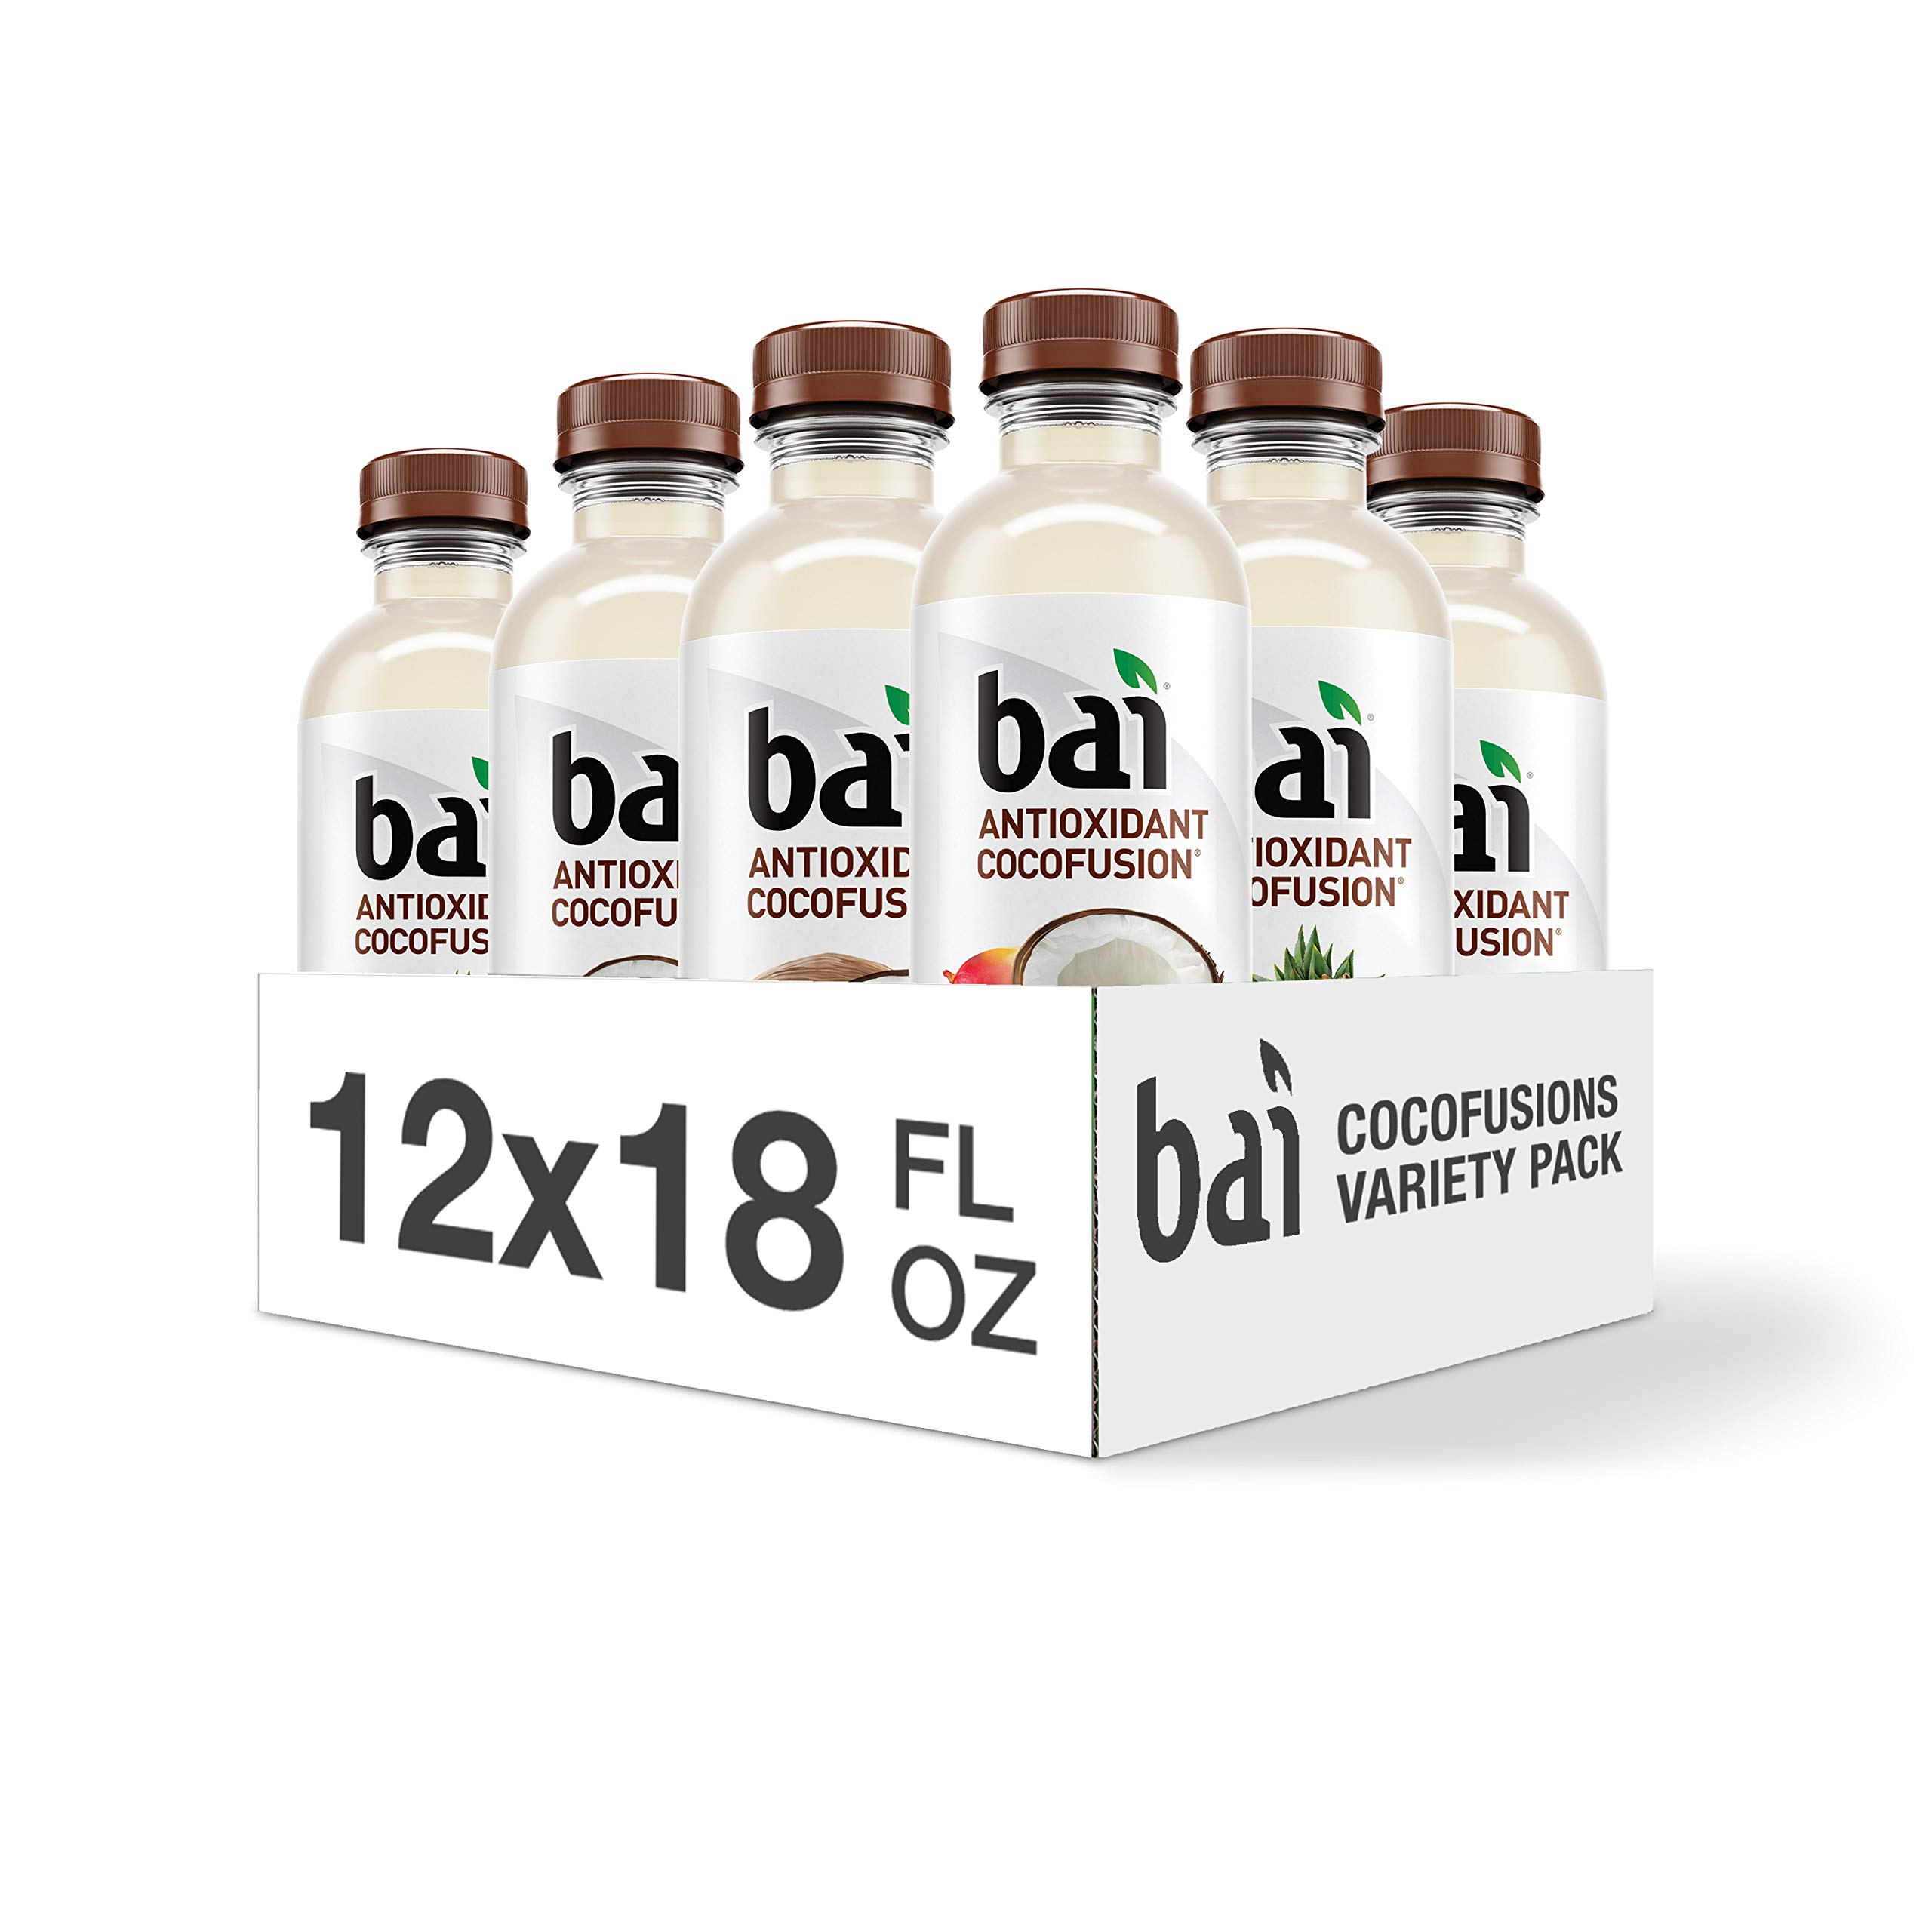 Book Cover Bai Coconut Flavored Water, Cocofusions Variety Pack II - 3 each of Andes Coconut Lime, Madagascar Coconut Mango, Molokai Coconut, Puna Coconut Pineapple - (Assorted Flavors)18 Fl Oz (Pack of 12)